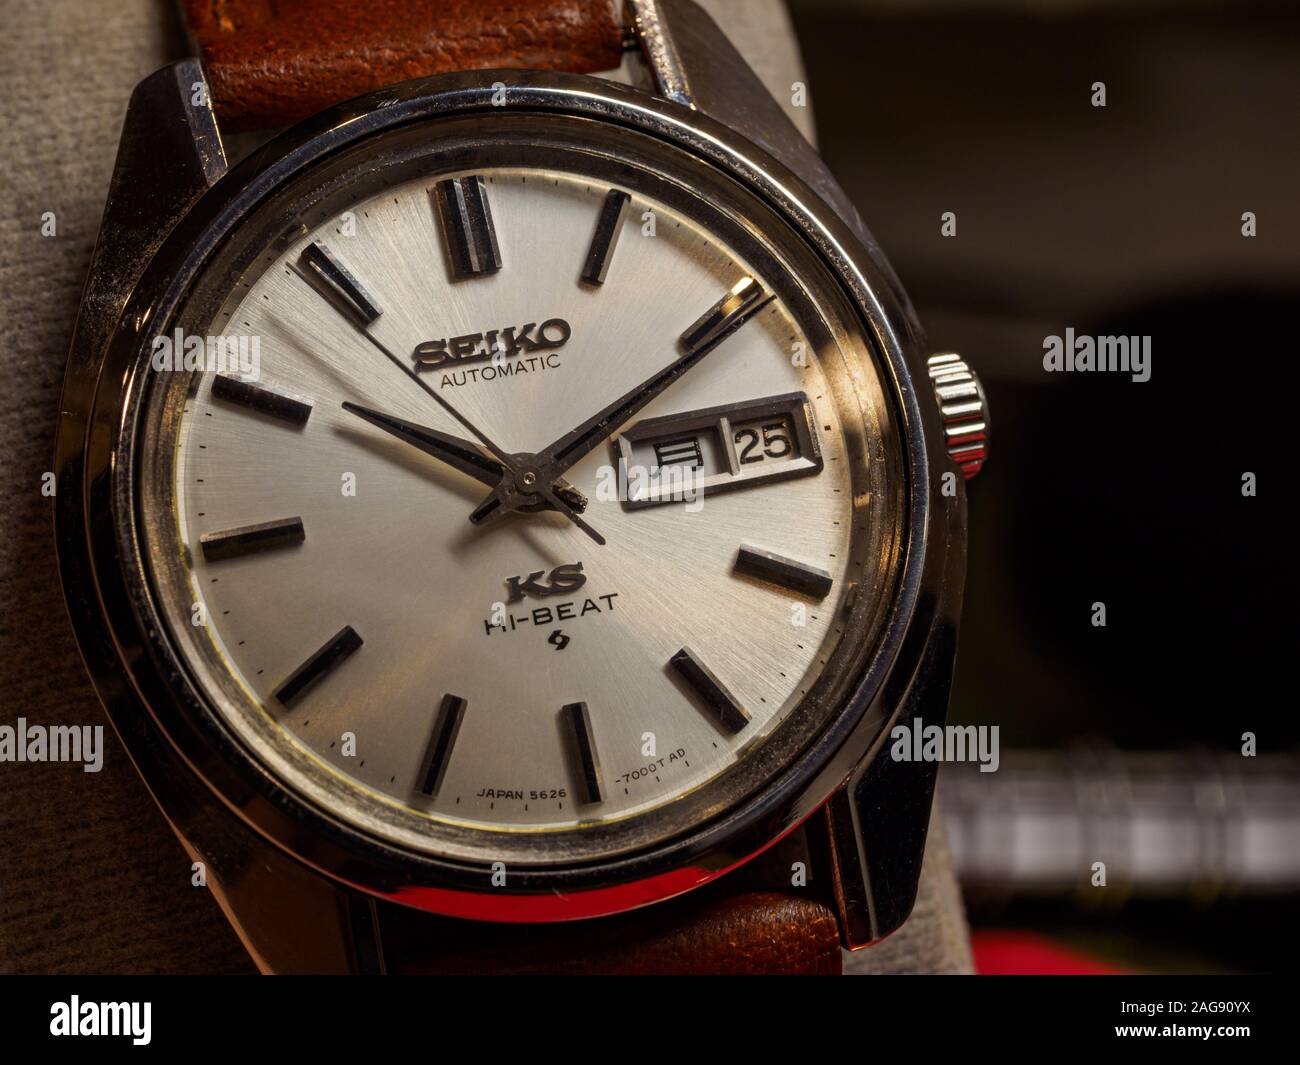 Close-up of the watch-face of a vintage King Seiko automatic watch from the  70s with copy space Stock Photo - Alamy